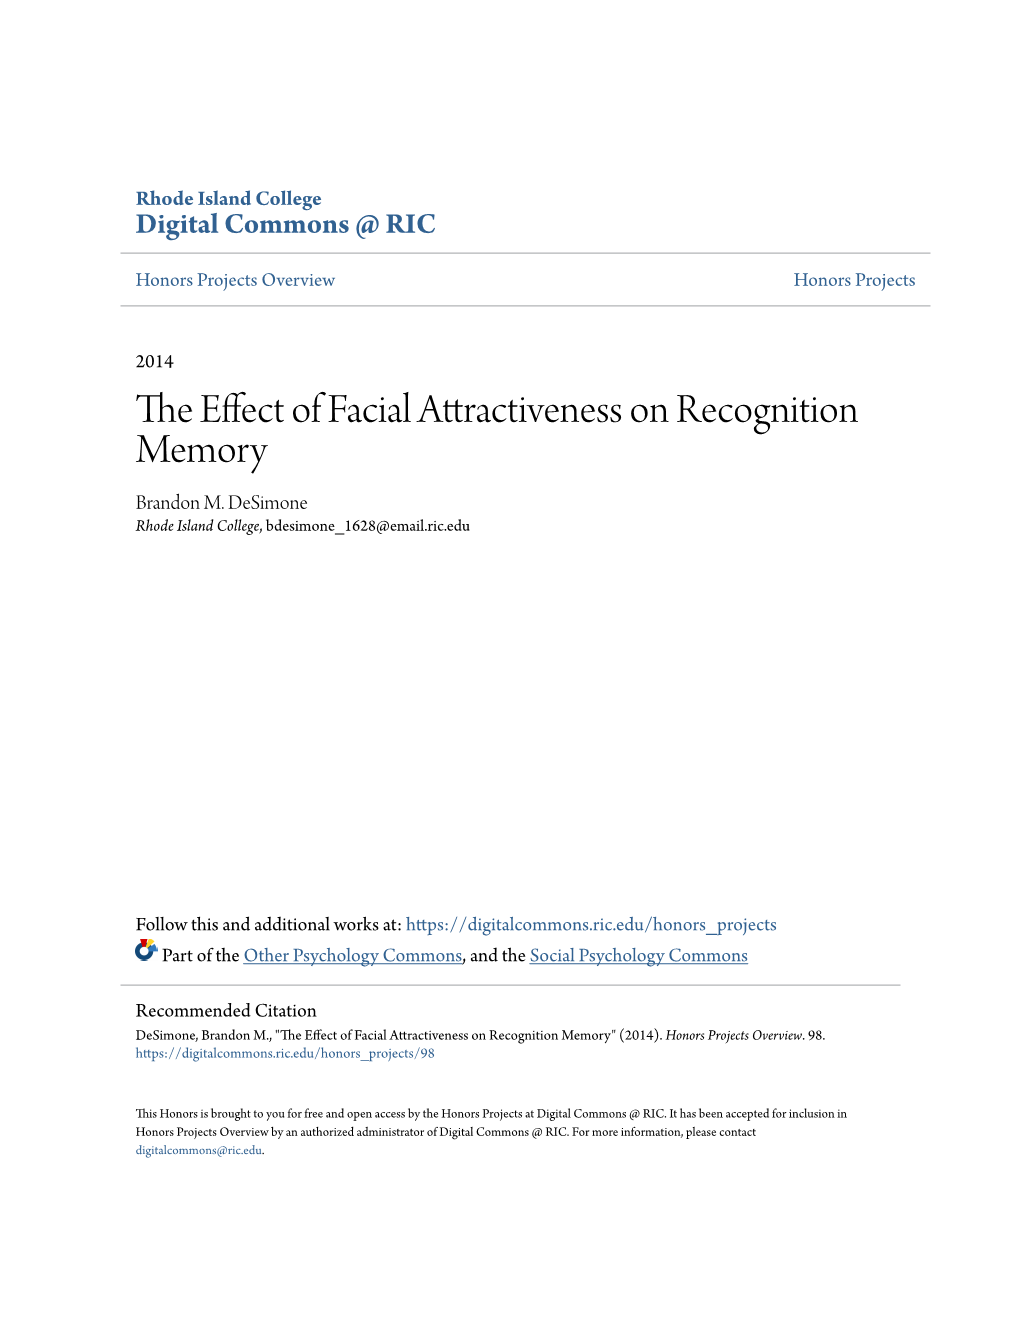 The Effect of Facial Attractiveness on Recognition Memory" (2014)